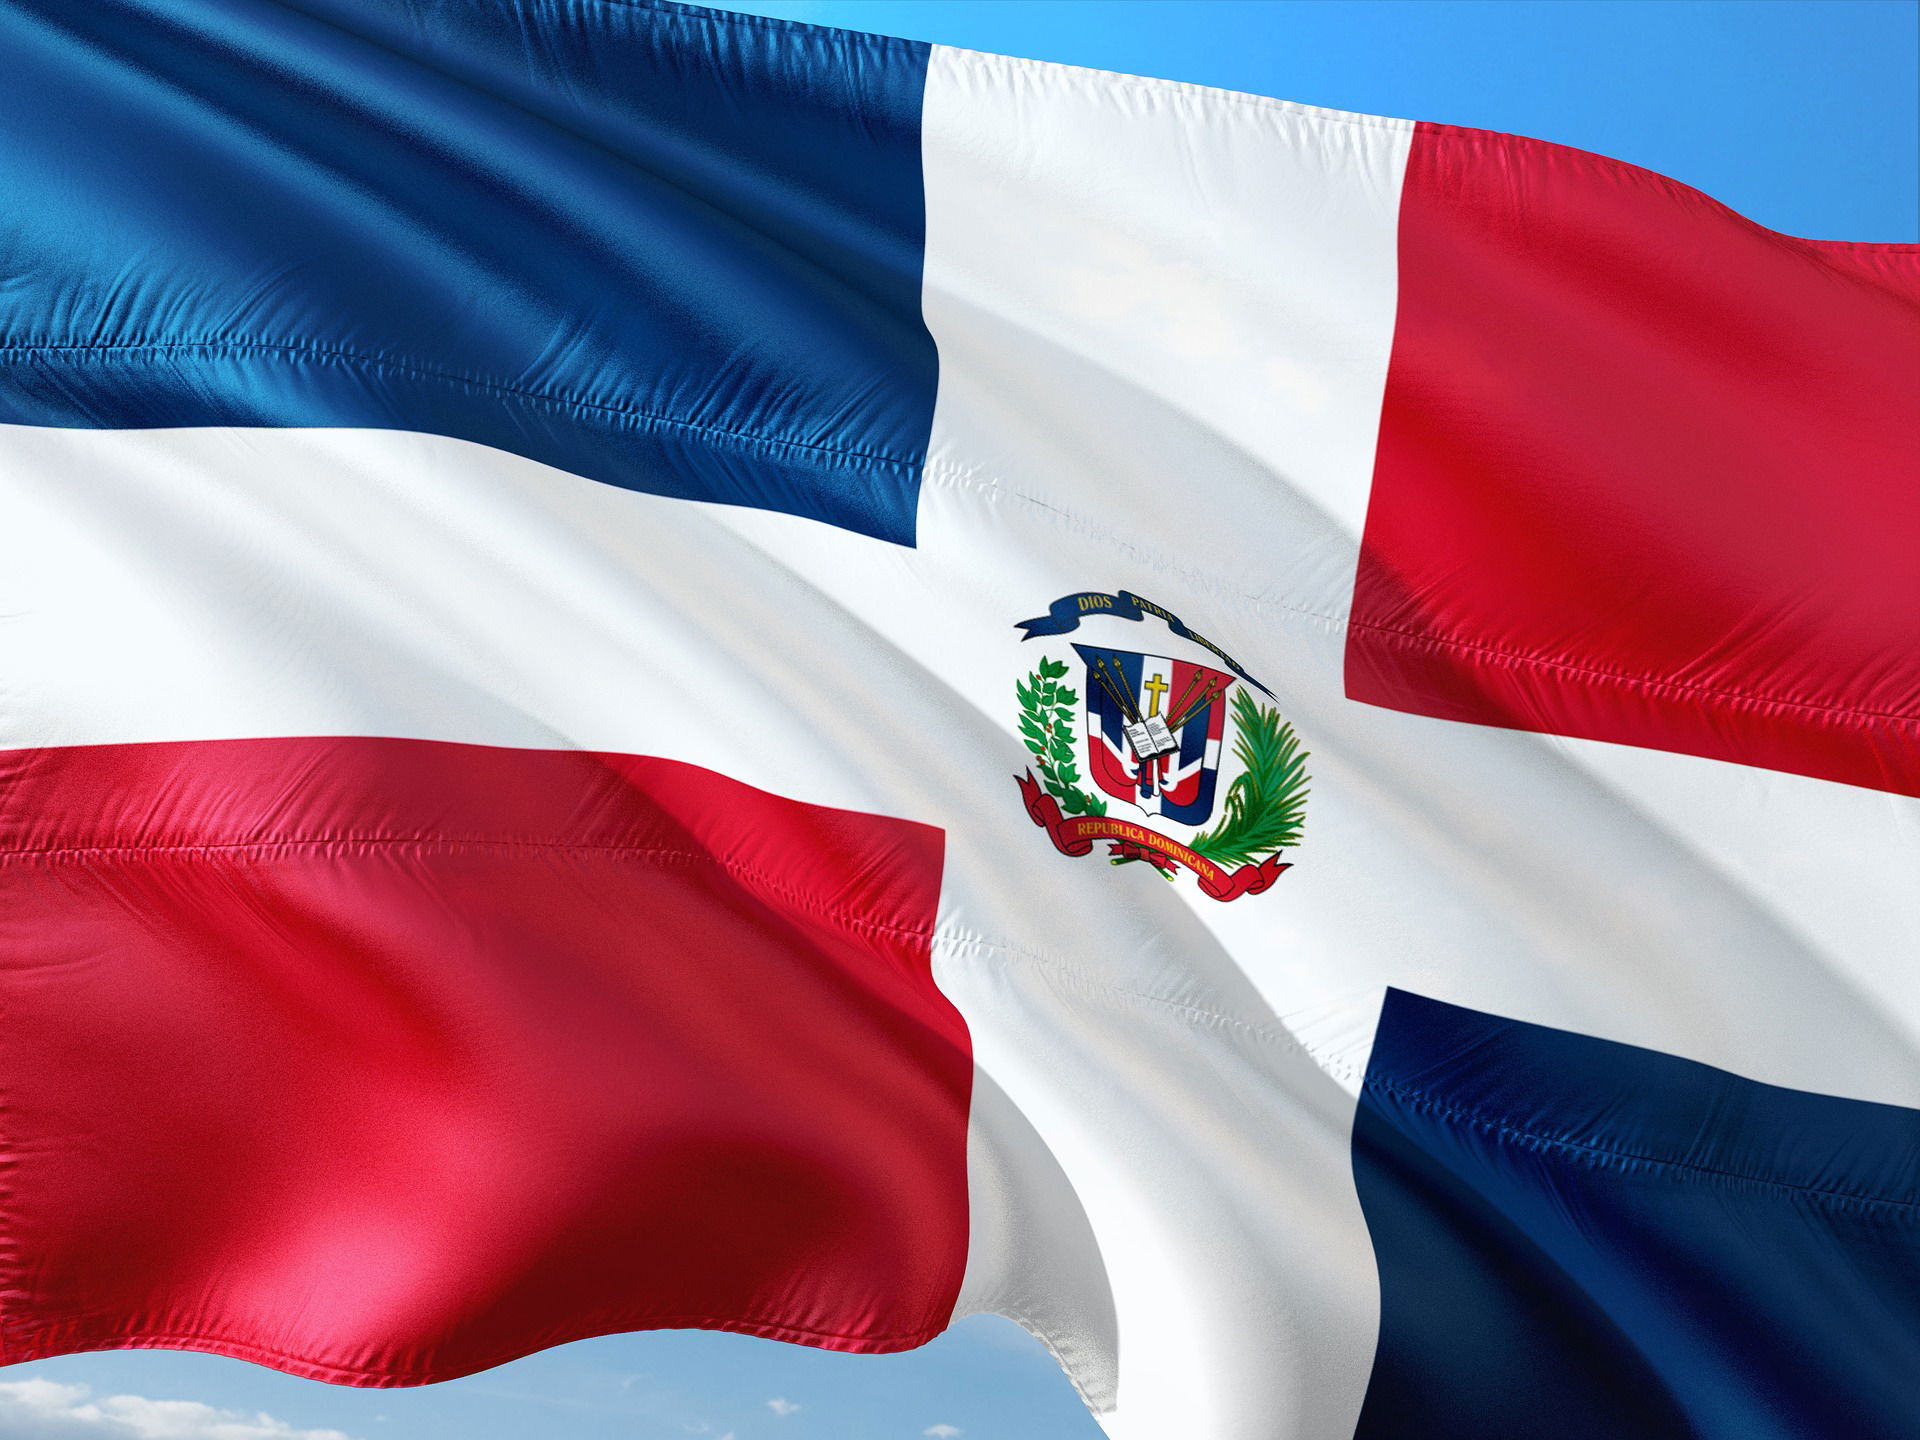 Why the Dominican Republic?